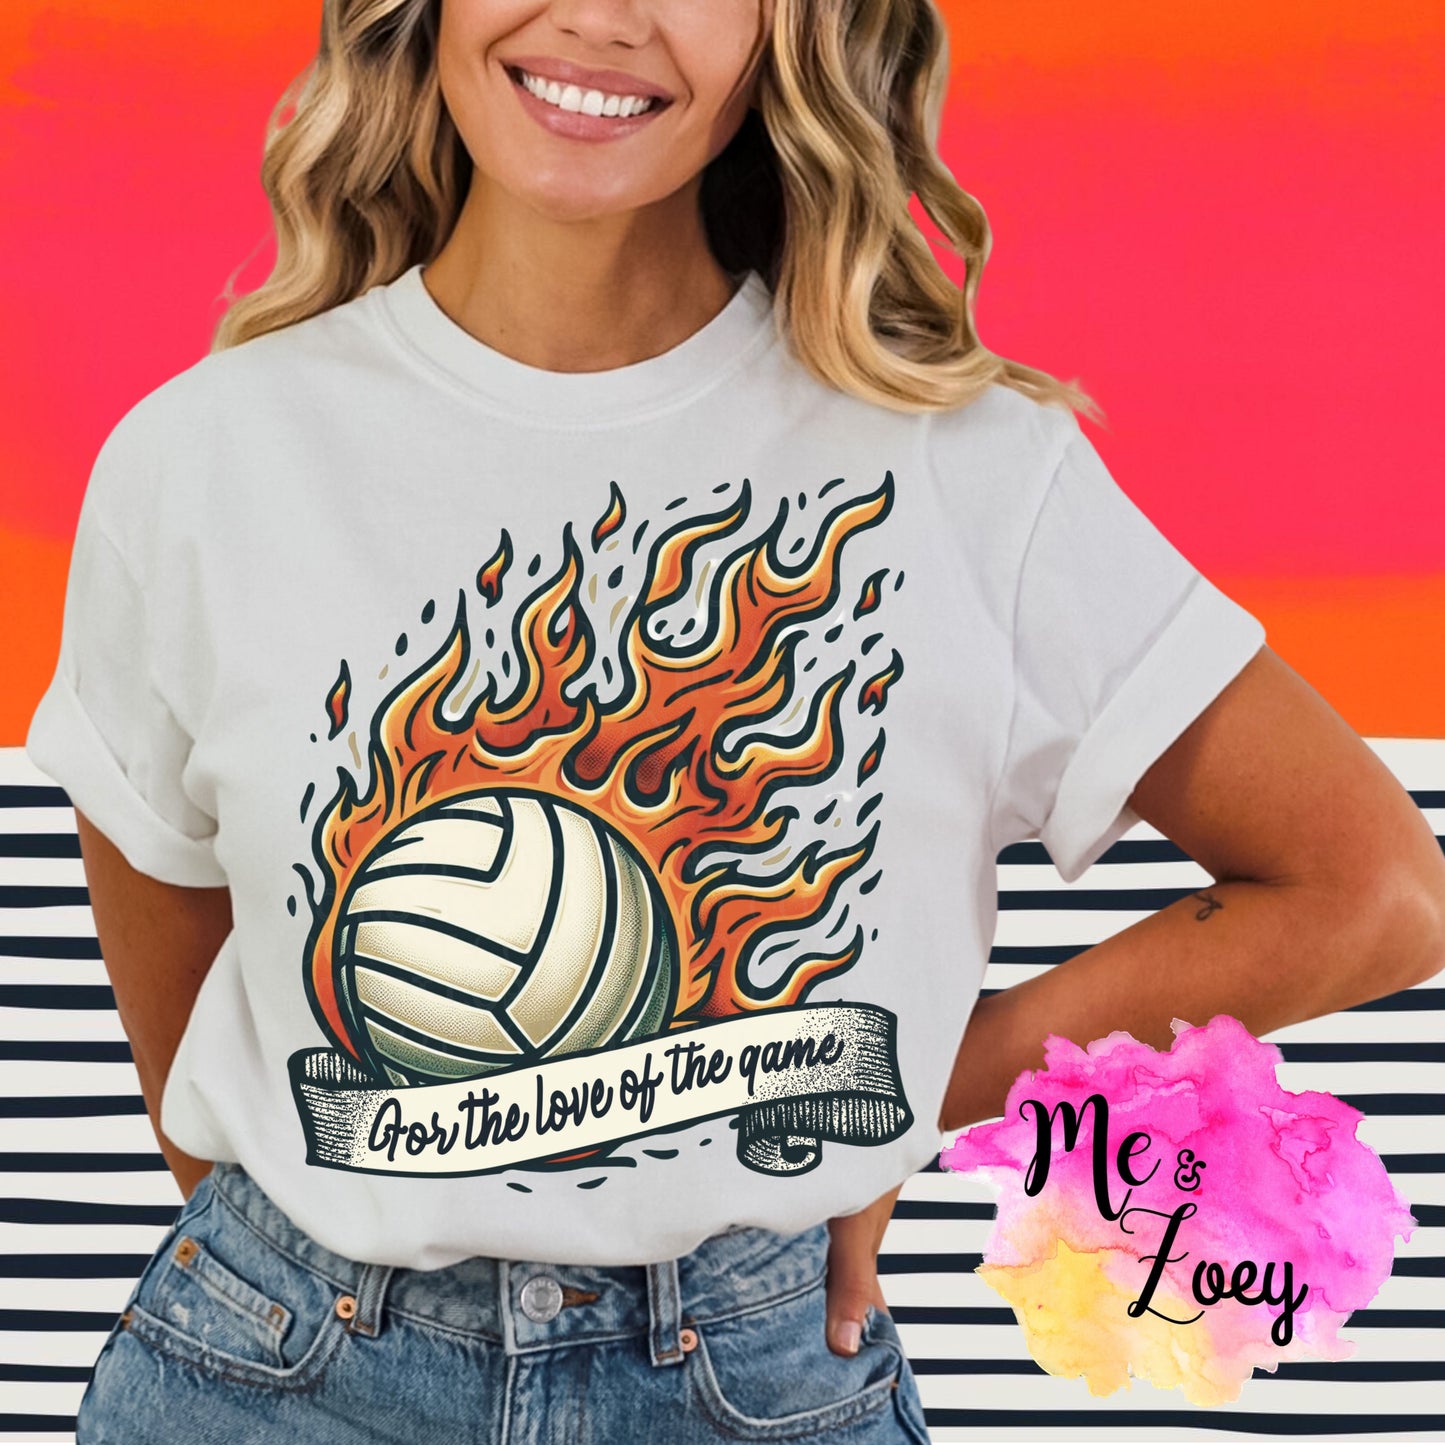 For the Love Of Sports Graphic Tee - MeAndZoey